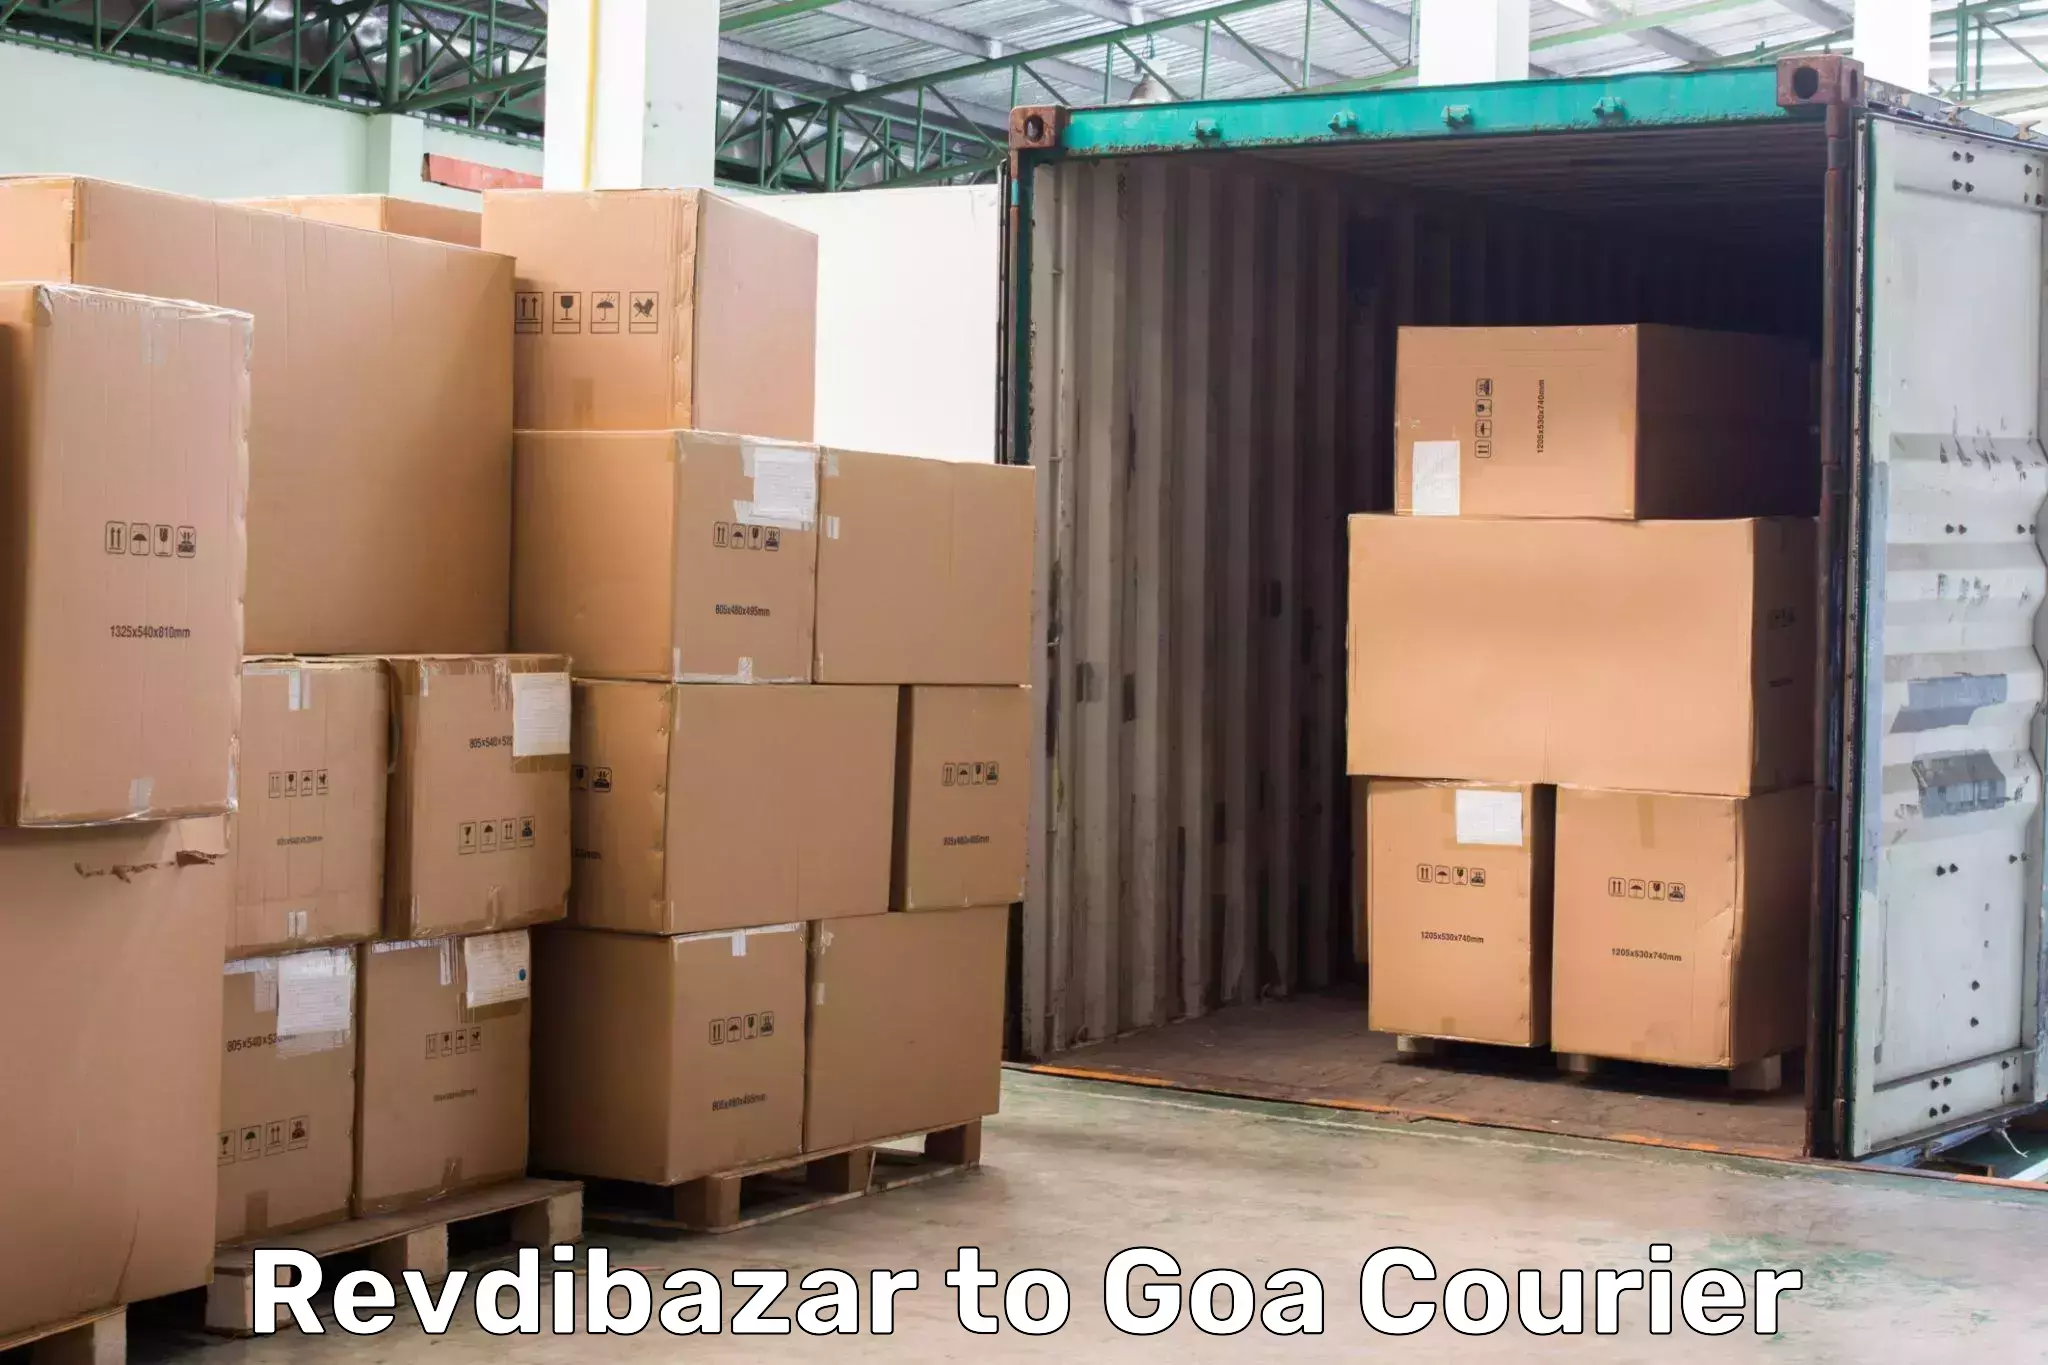 Express package handling in Revdibazar to South Goa